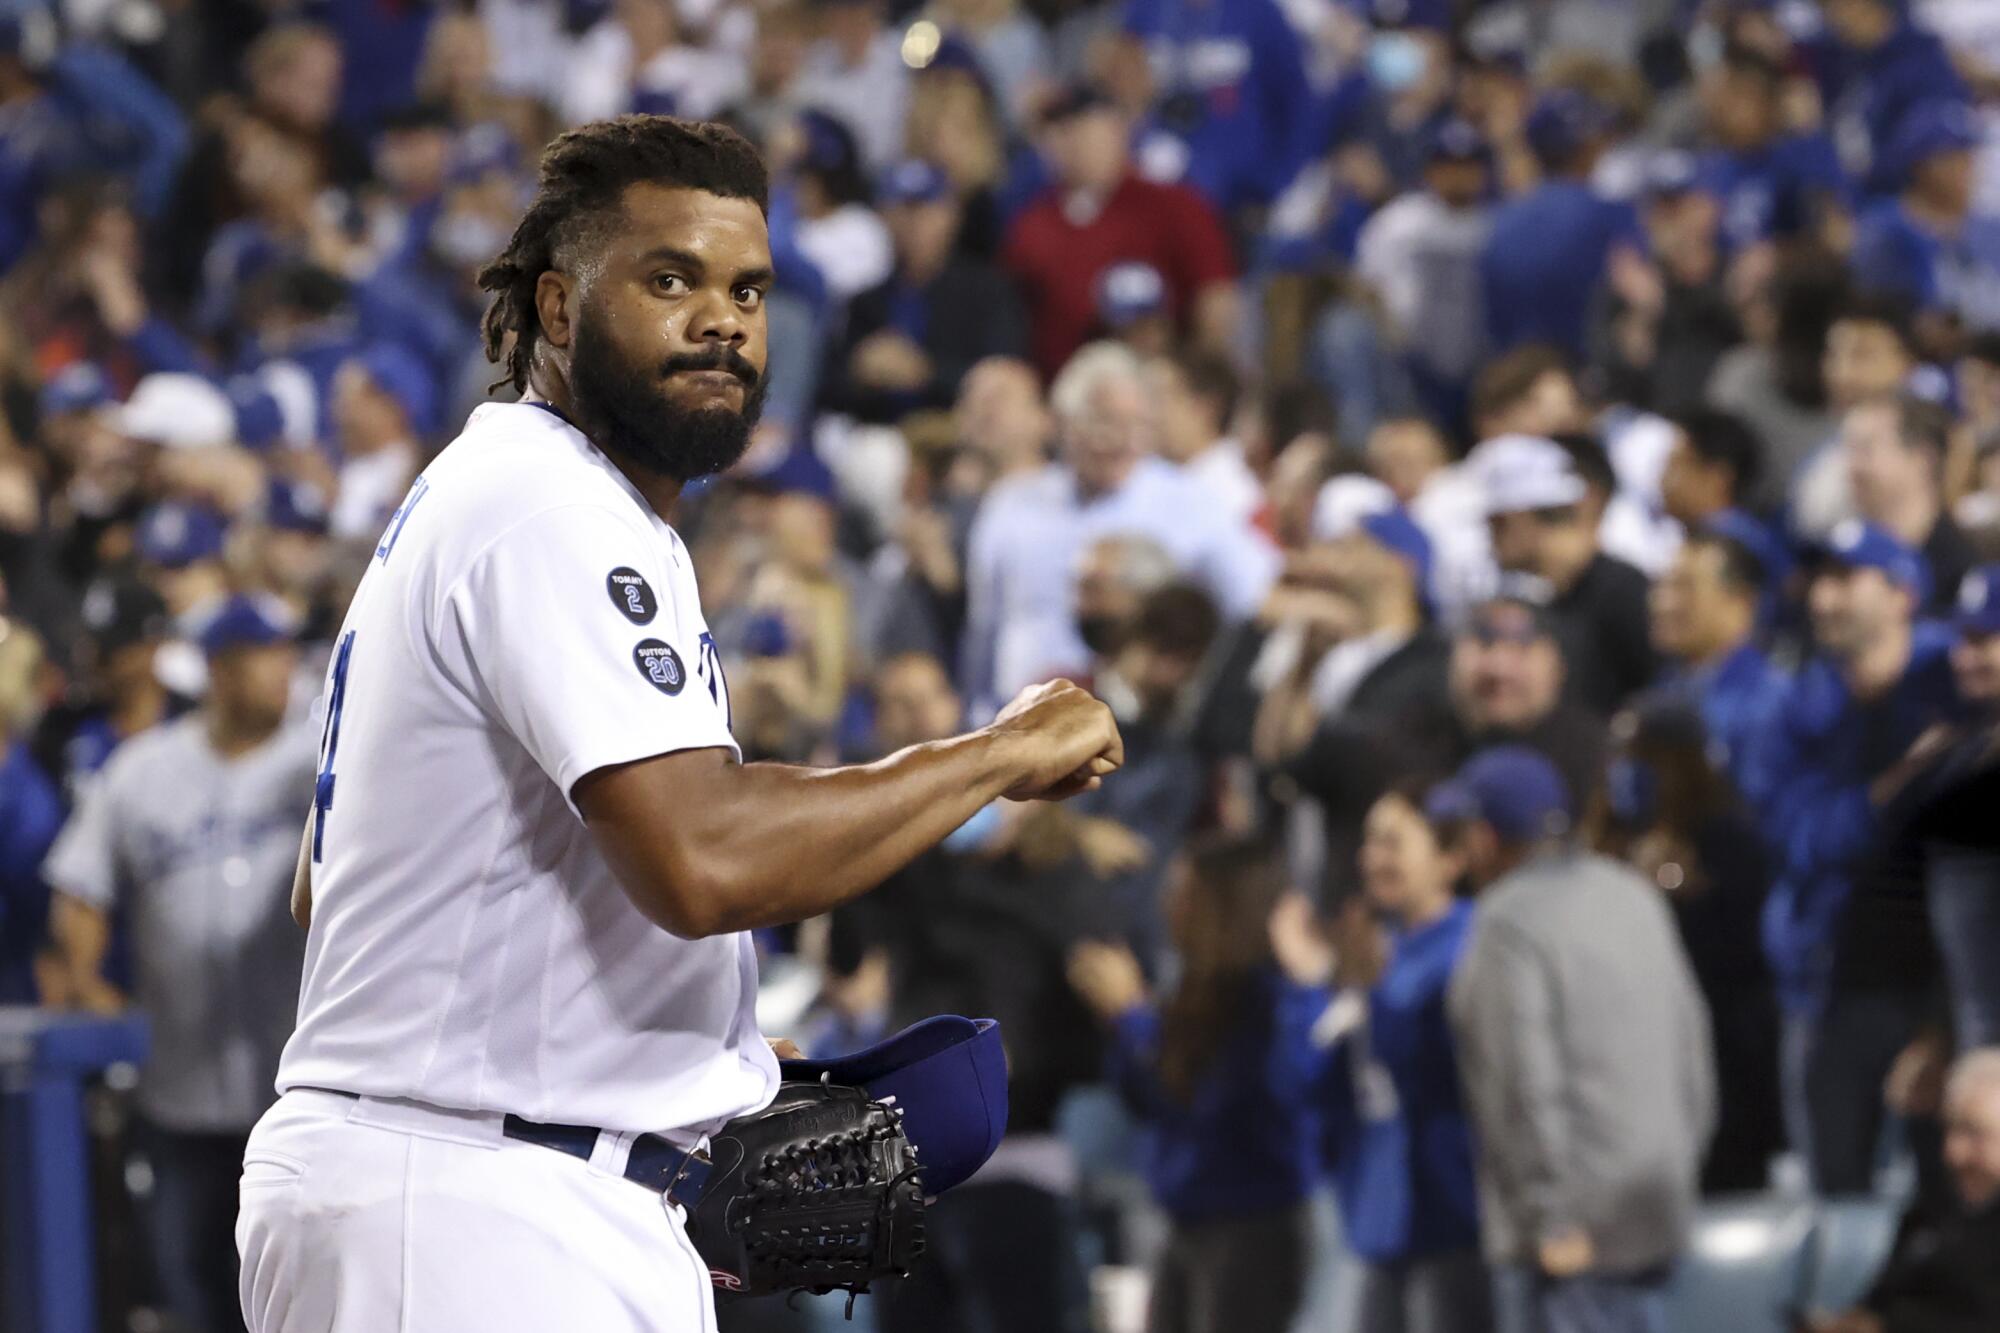 Los Angeles Dodgers relief pitcher Kenley Jansen walks off the field after retiring the side